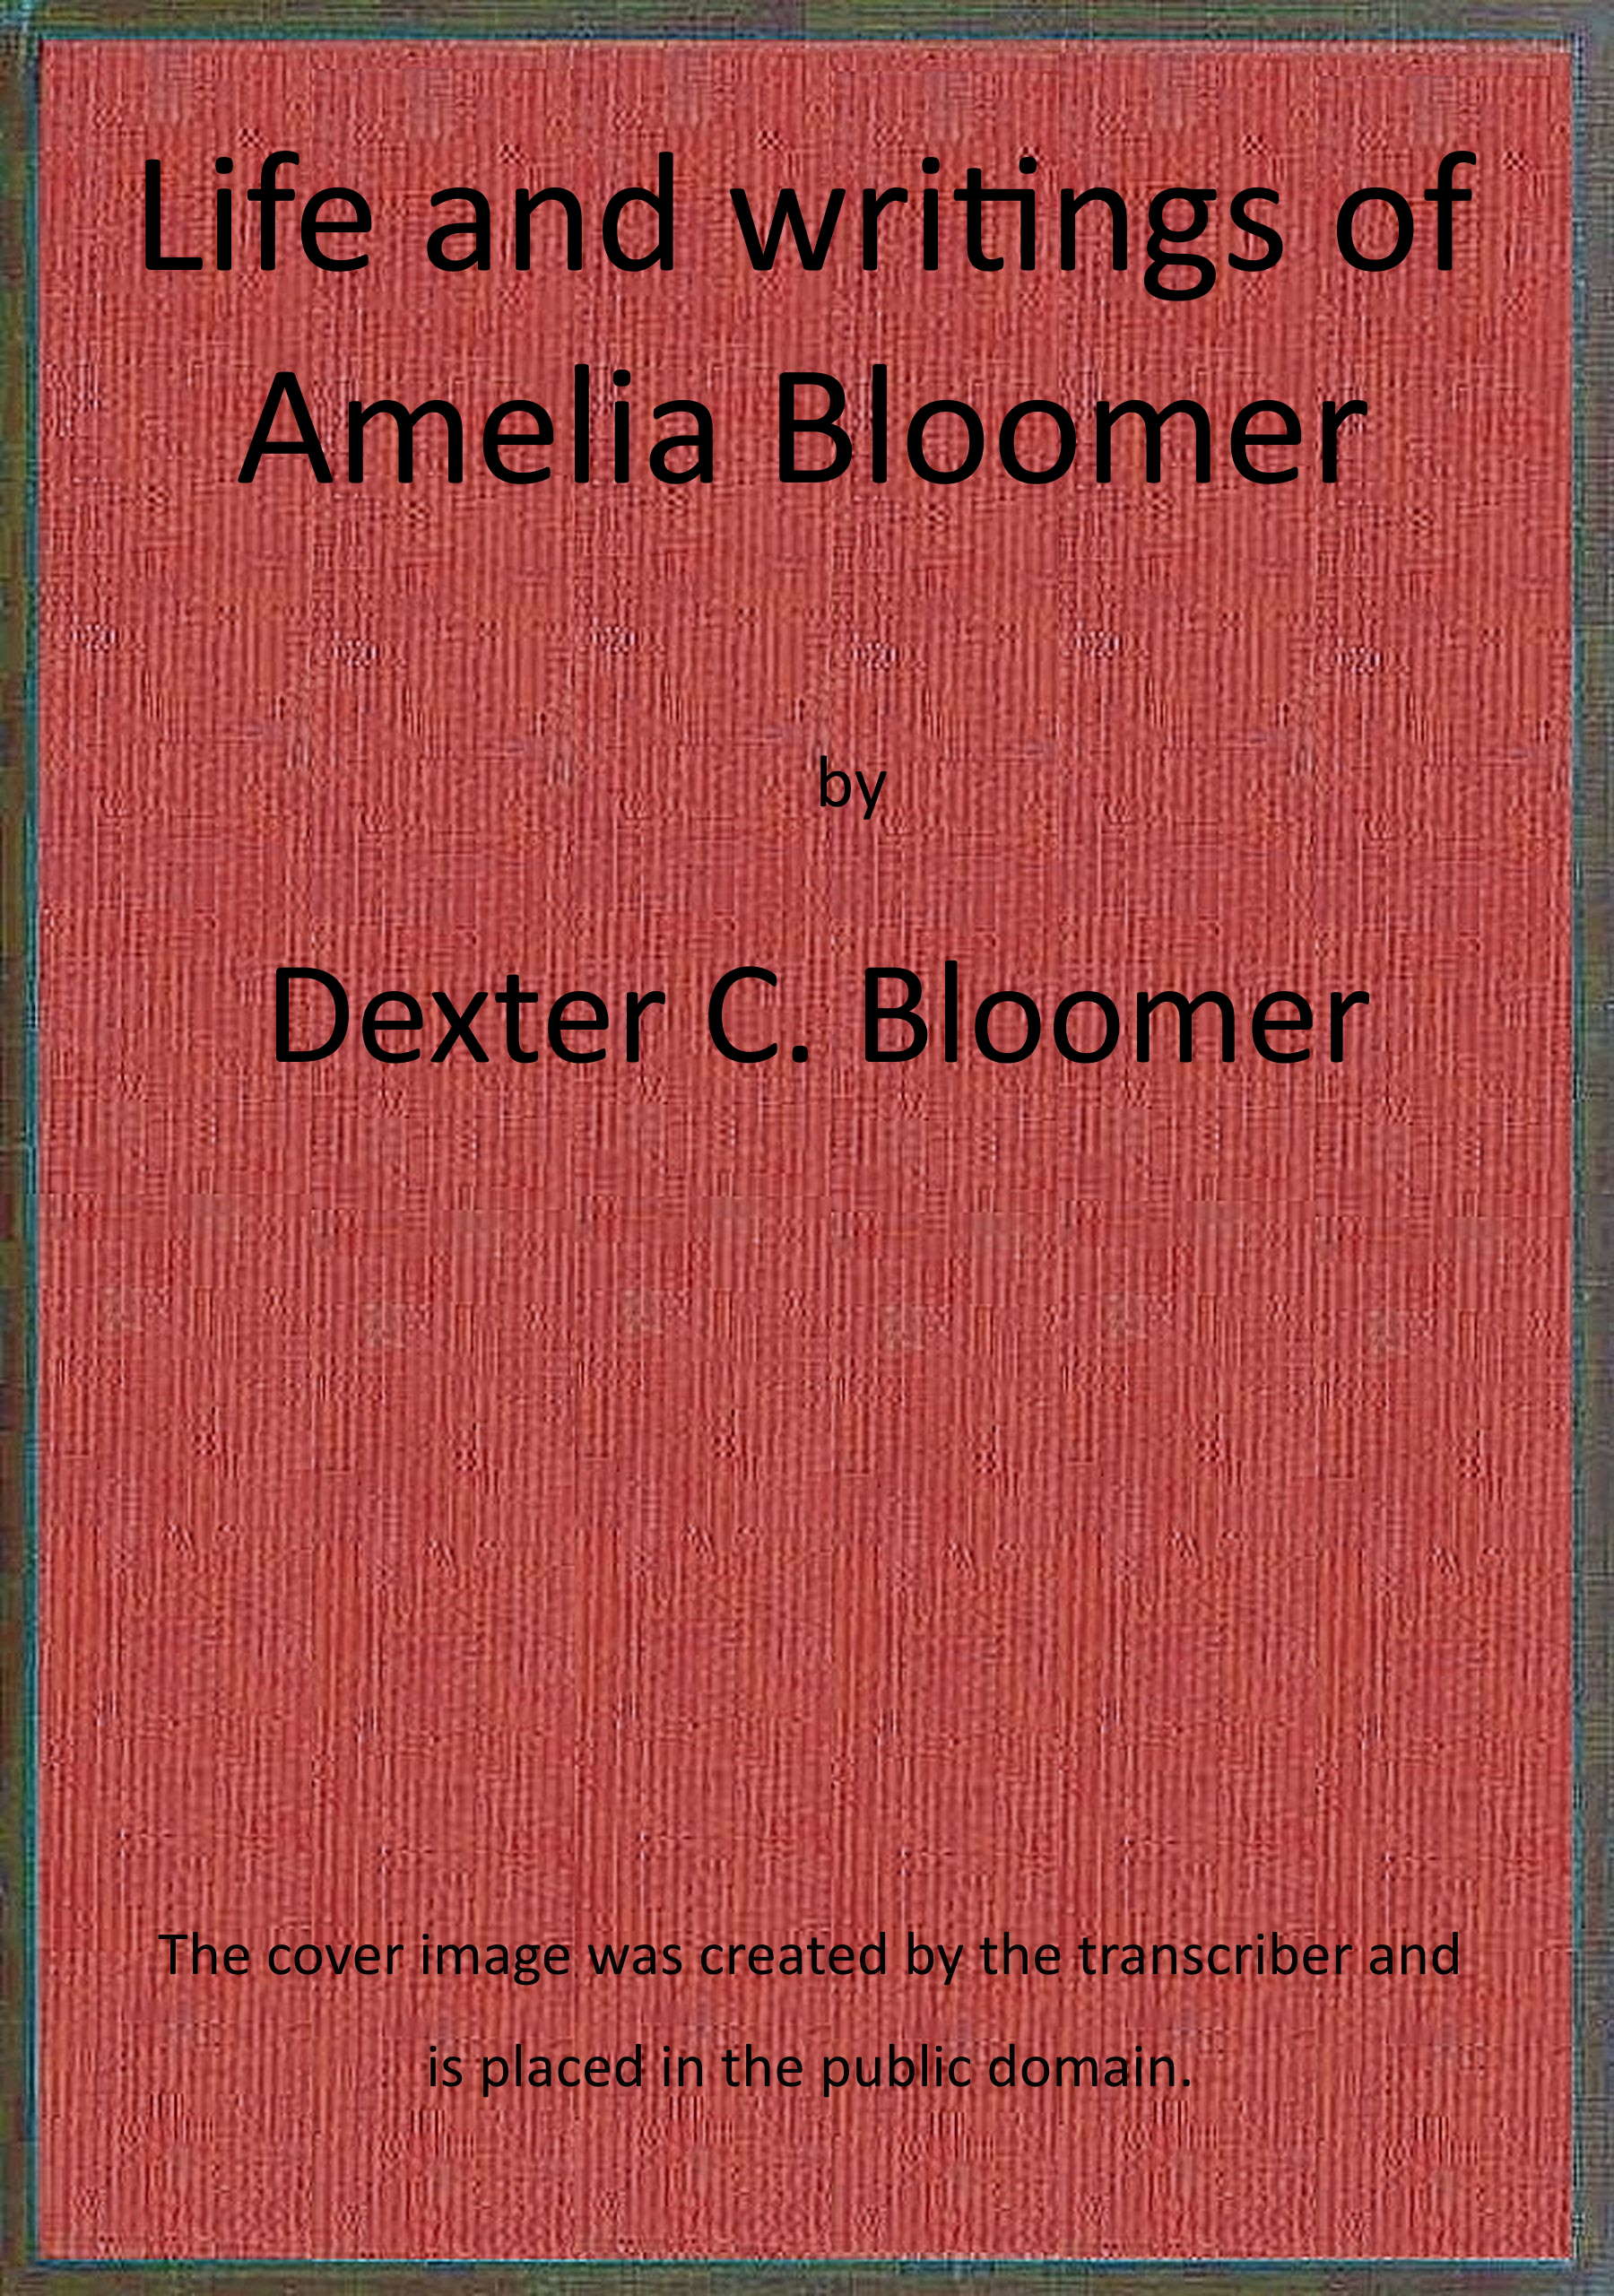 May 27, 1818: Amelia Bloomer Was Born and Popularized Women Wearing Pants  Under Their Skirts - Lifetime